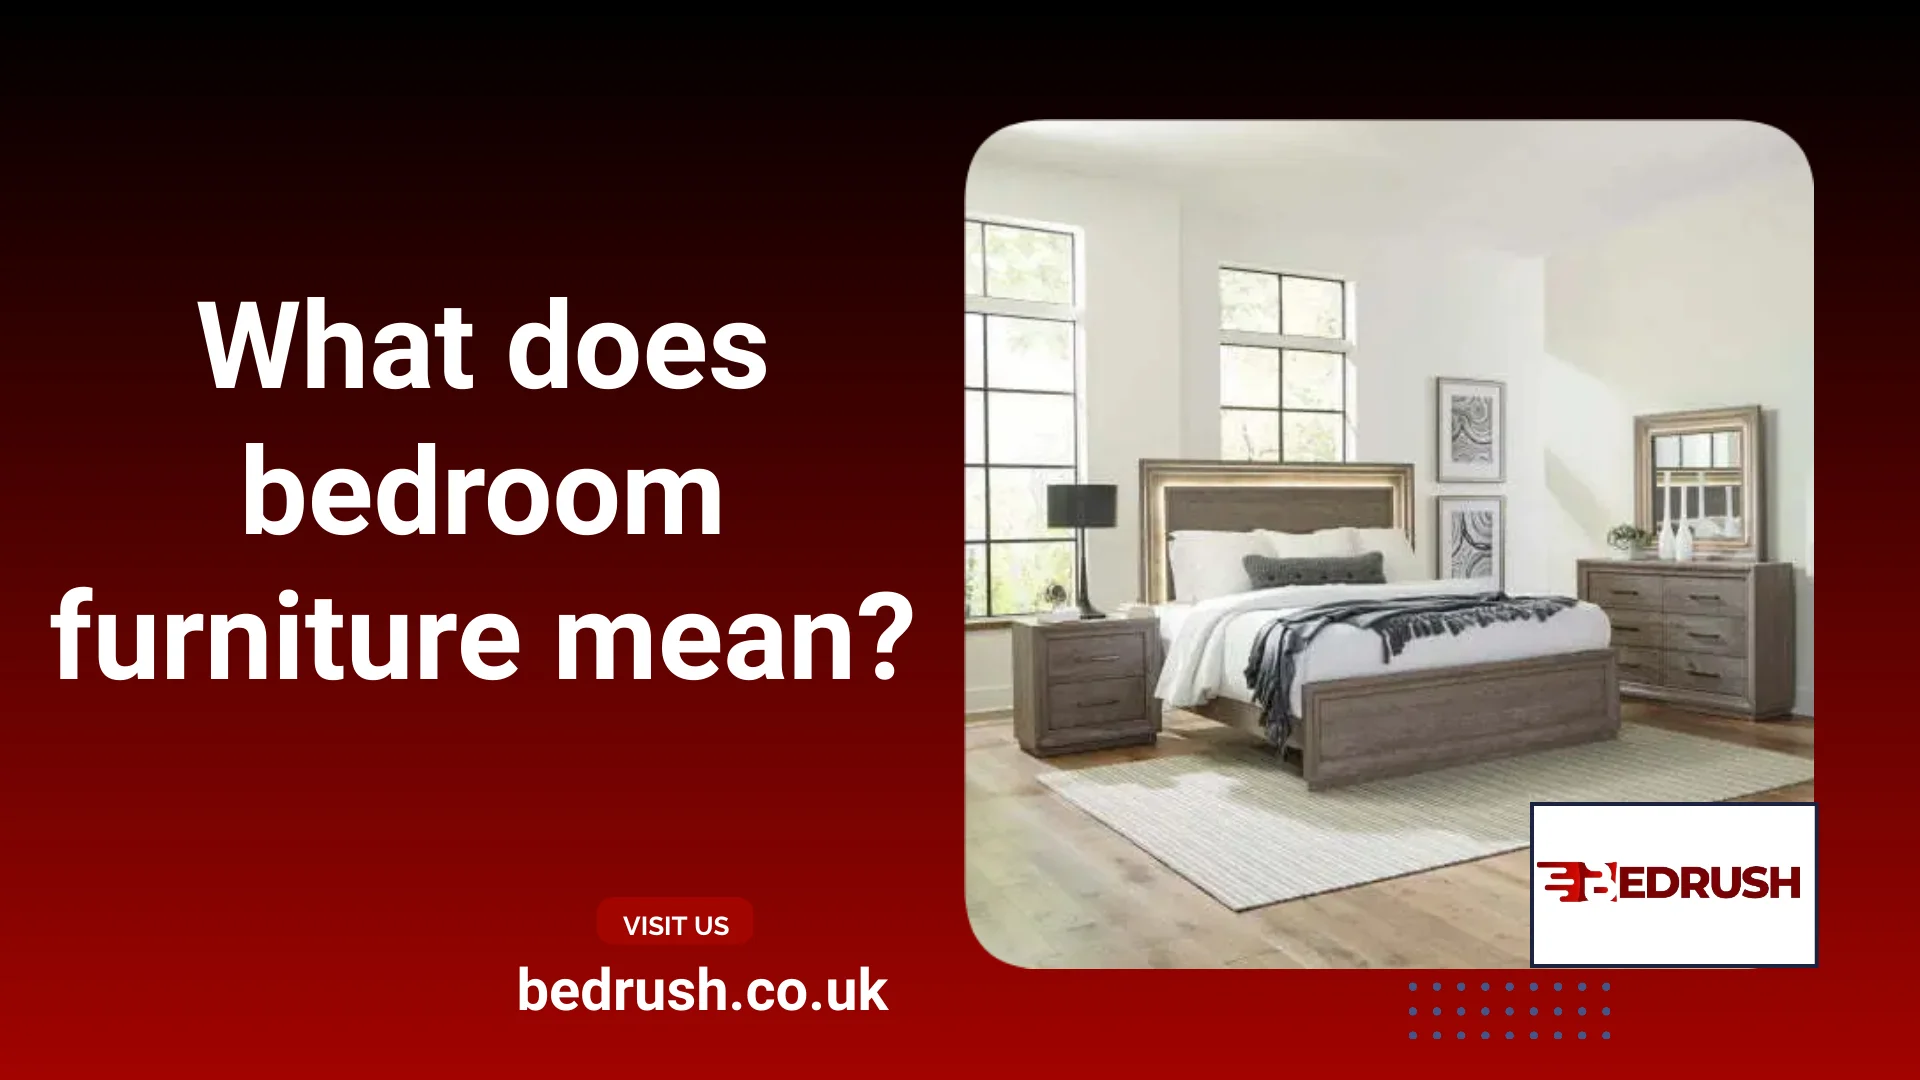 What does bedroom furniture mean?